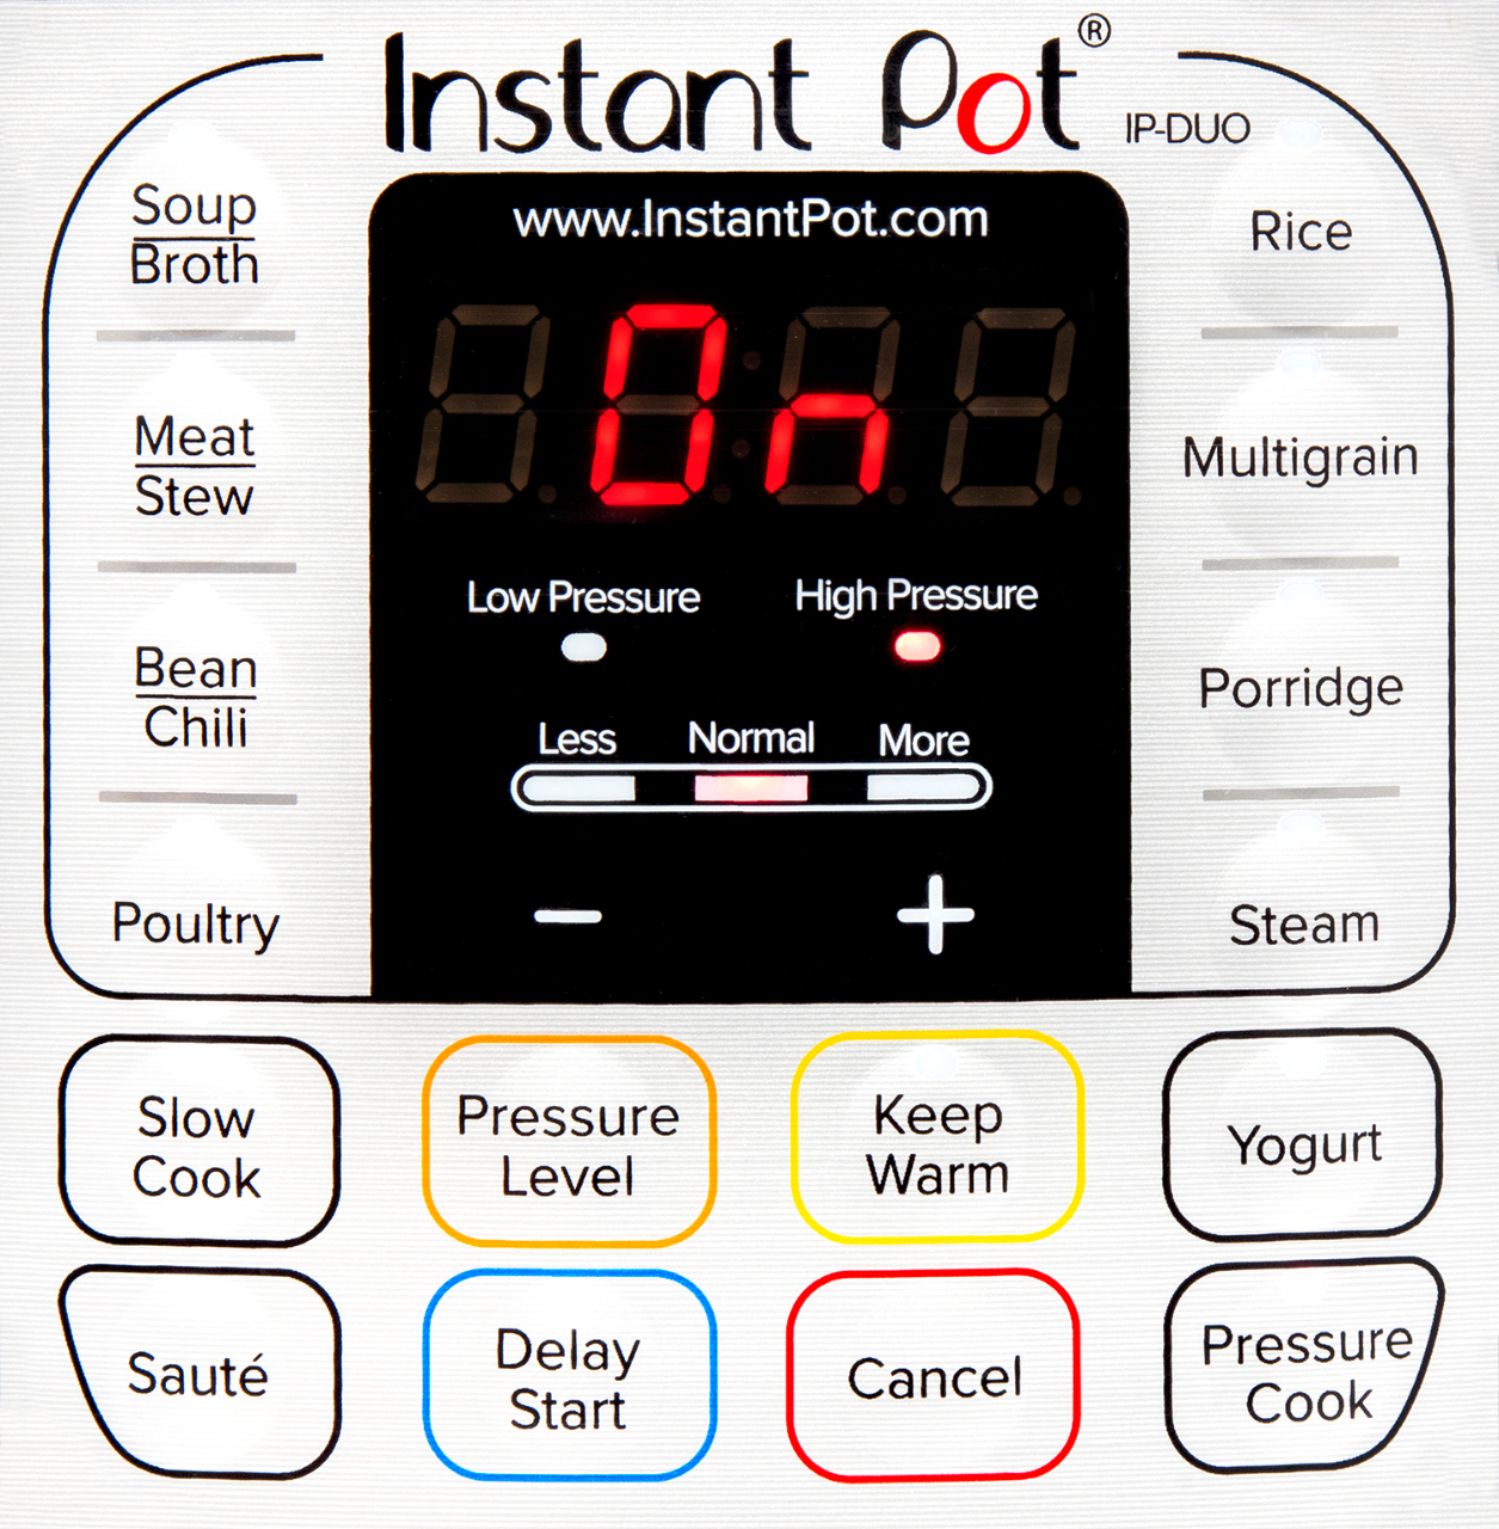 Instant Pot Duo 8 Quart 7-in-1 Multi-Use Pressure Cooker Black/Stainless  Steel IP-DUO80 - Best Buy